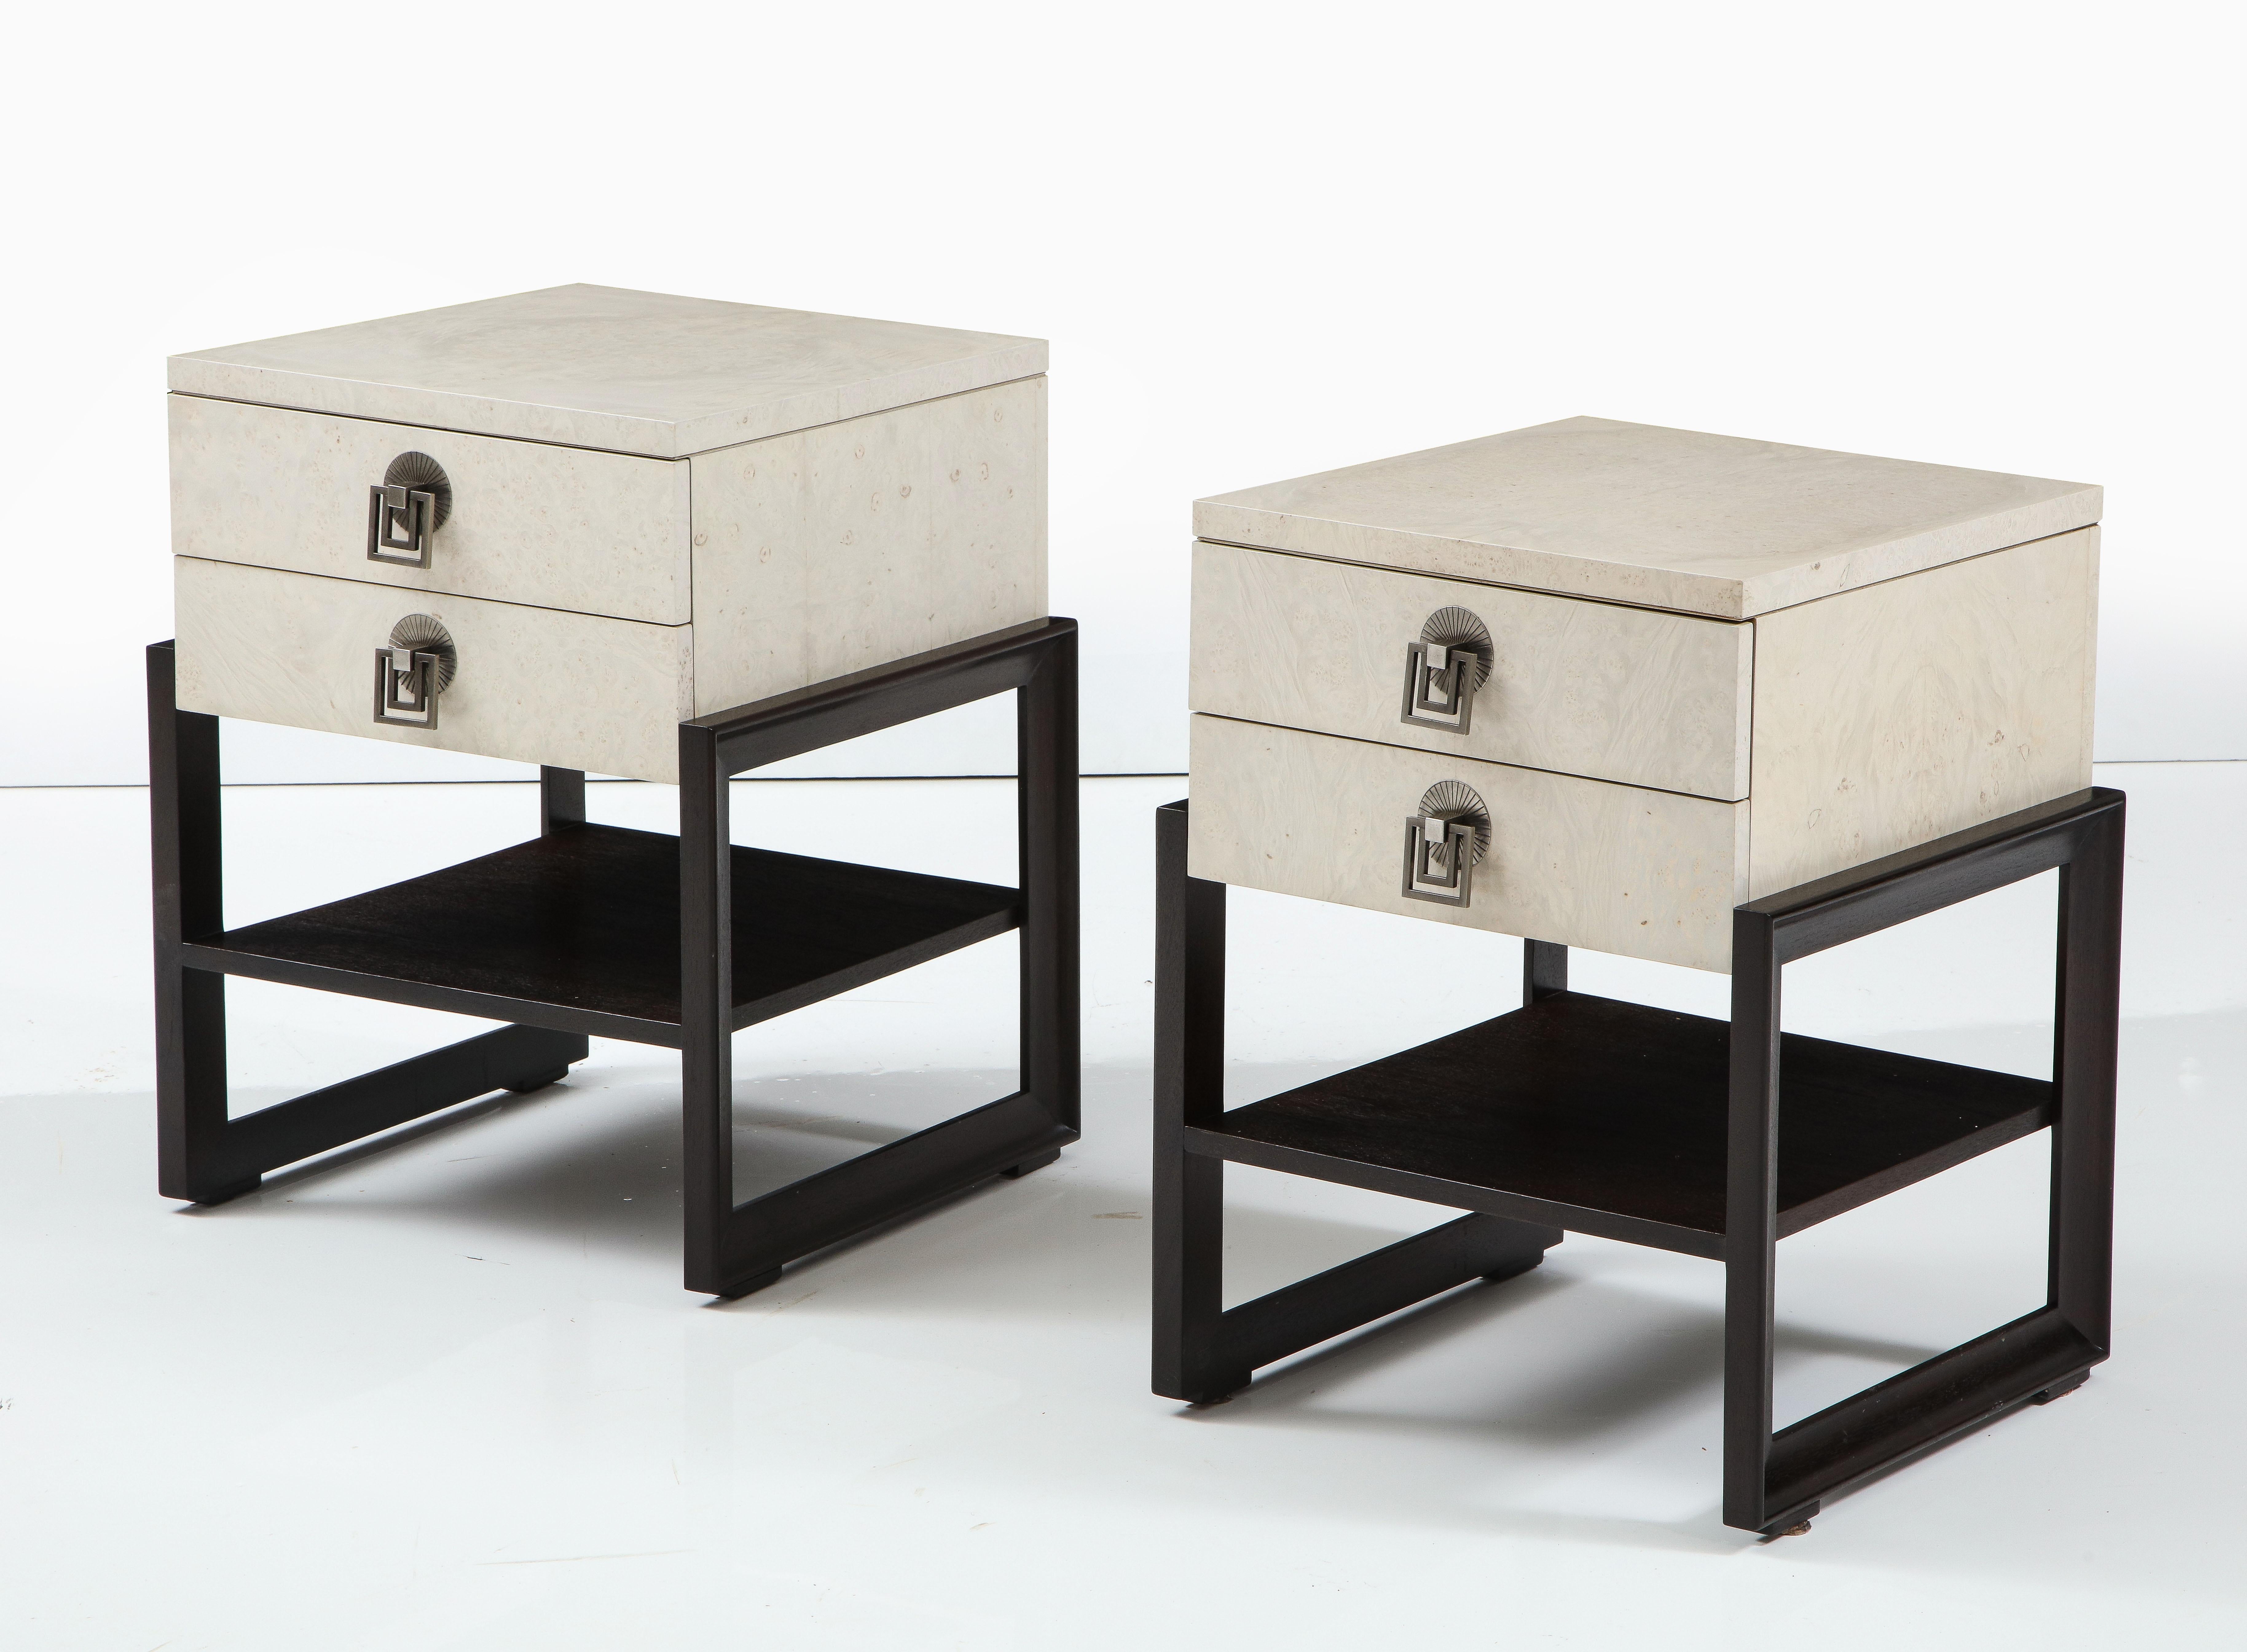 Pair of custom finished nightstands featuring bleached birds eye maple with a pearl grey stain sitting on mahogany stands. Nightstands have 2 drawers with original hardware in a brushed nickel finish. Designed by Renzo Rutili for Johnson Bros.